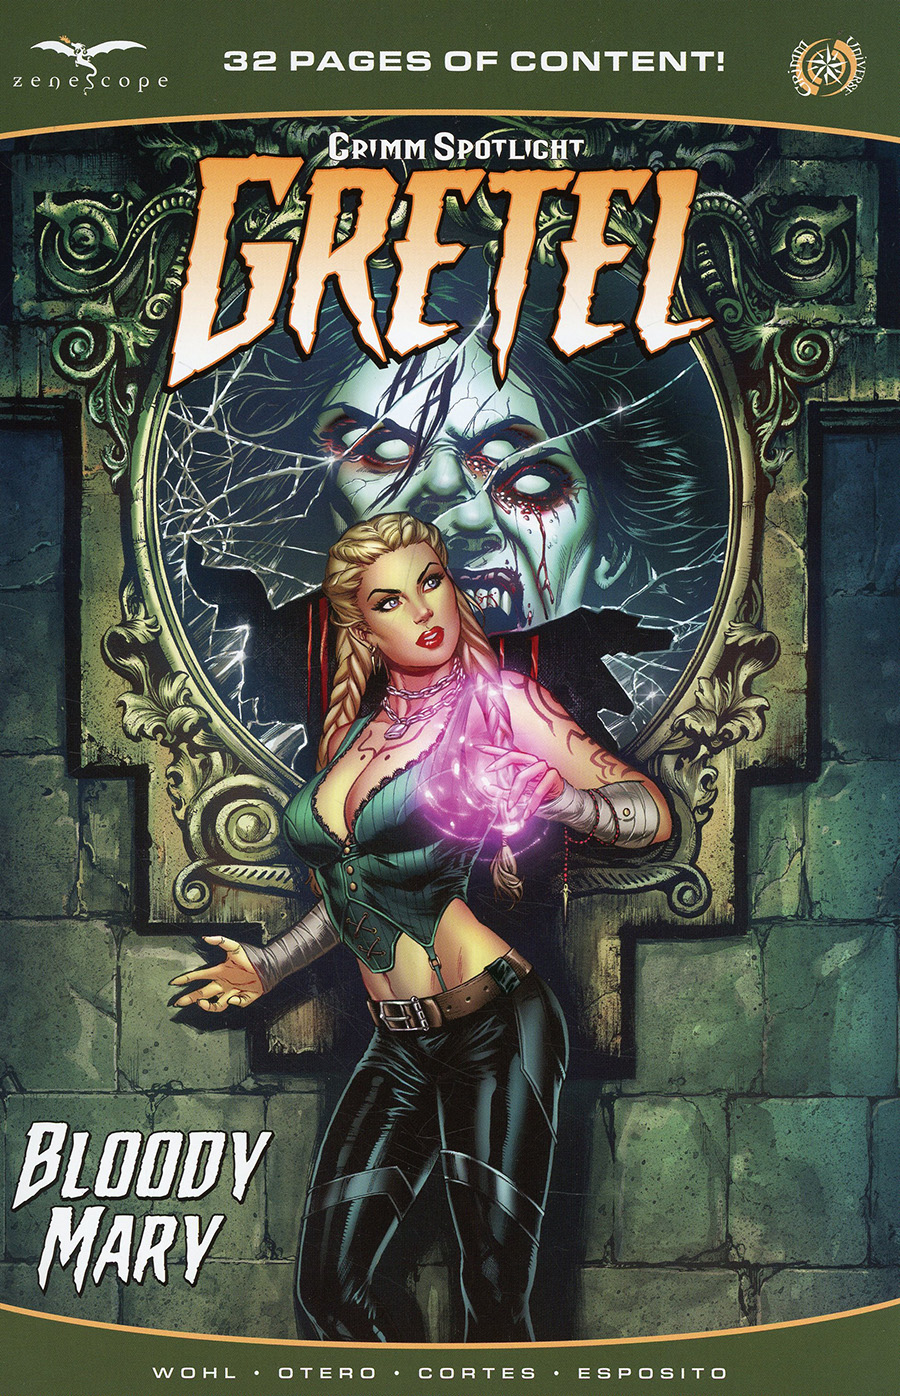 Grimm Spotlight Gretel Bloody Mary #1 (One Shot) Cover A Mike Krome